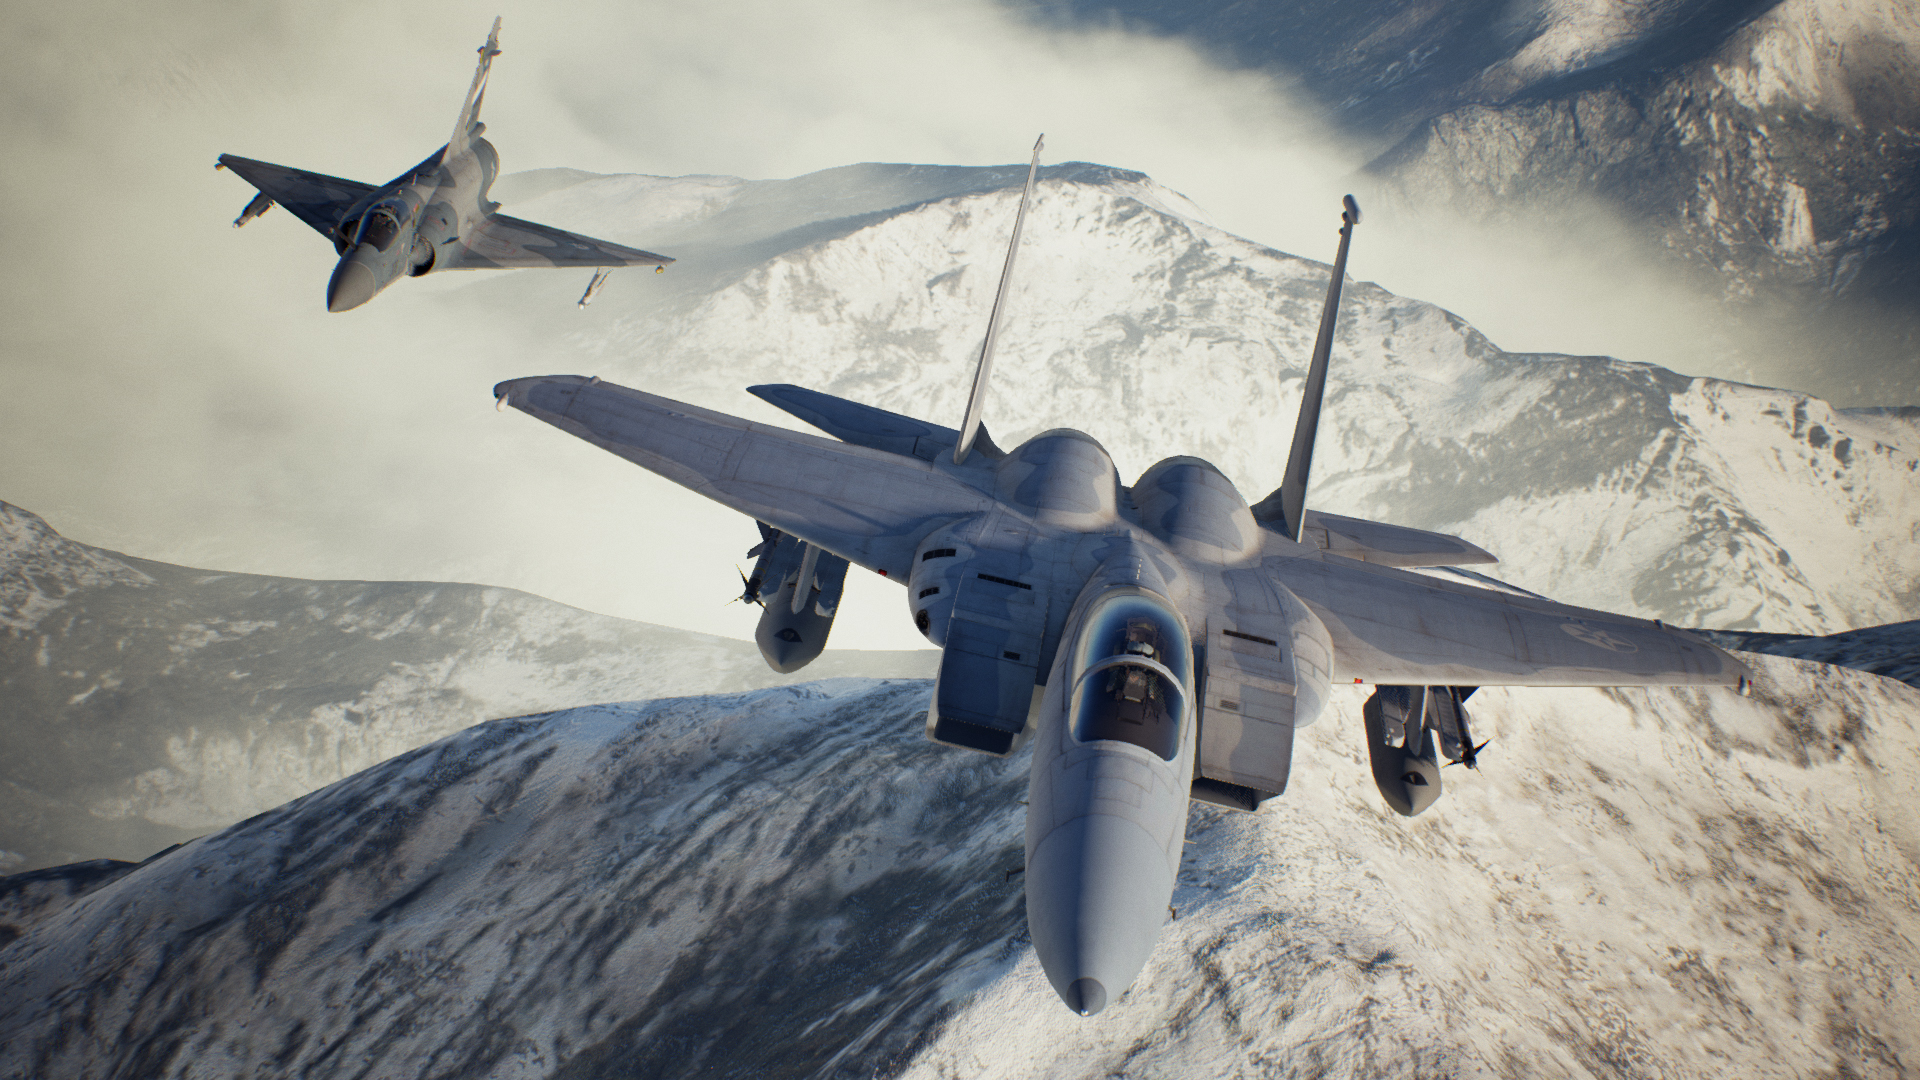 ACE COMBAT™ 7: SKIES UNKNOWN DLC - Cutting-edge Aircraft Series